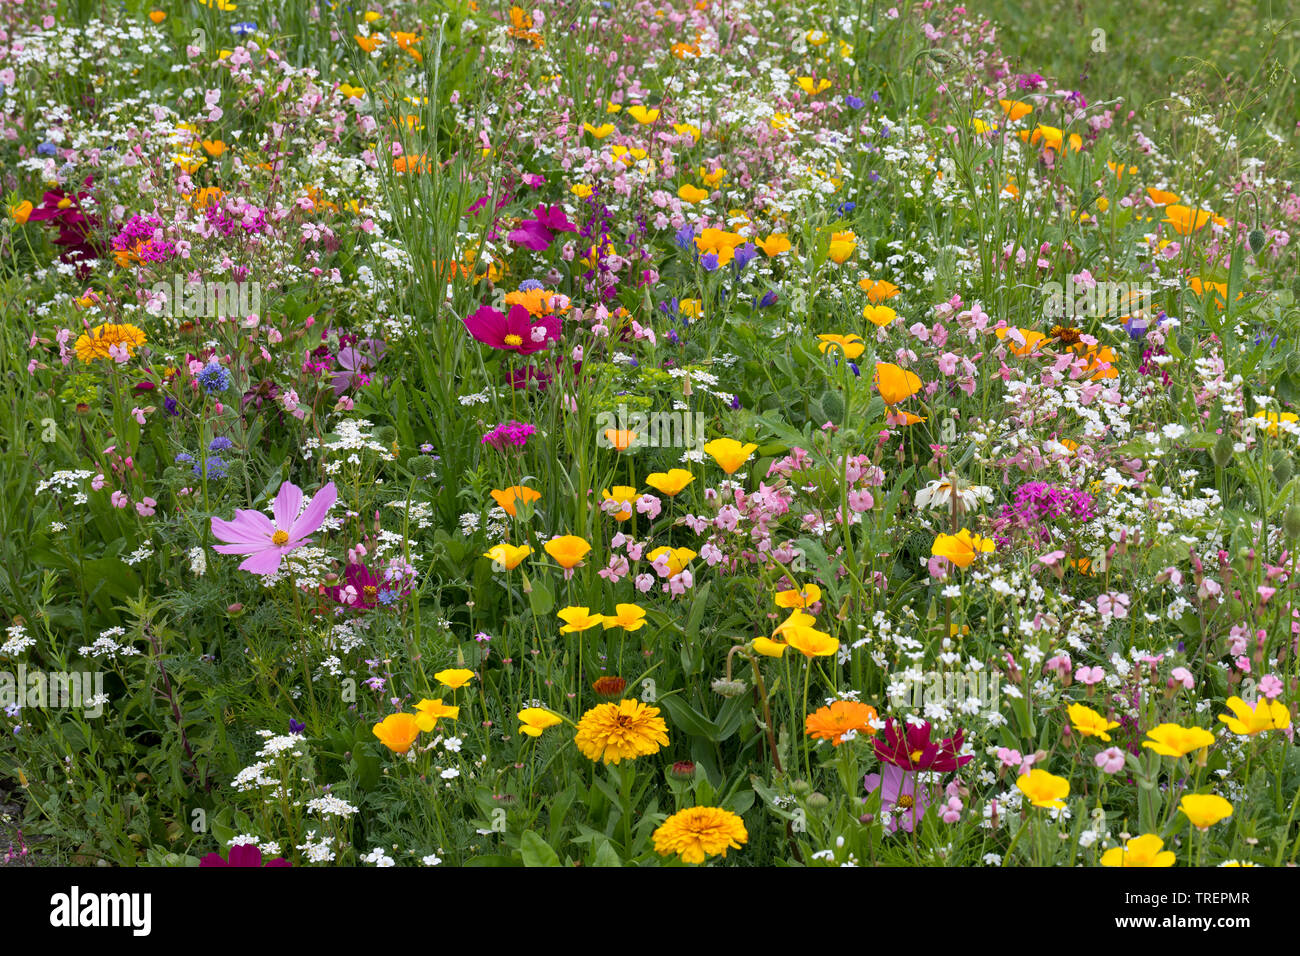 Wildblumenwiese Wildblumen-Wiese Blumenwiese,,,, Blumenmischung Blumenmischung Wildblumen, 'Werratal', Insektenschutz, wildflower meadow Banque D'Images